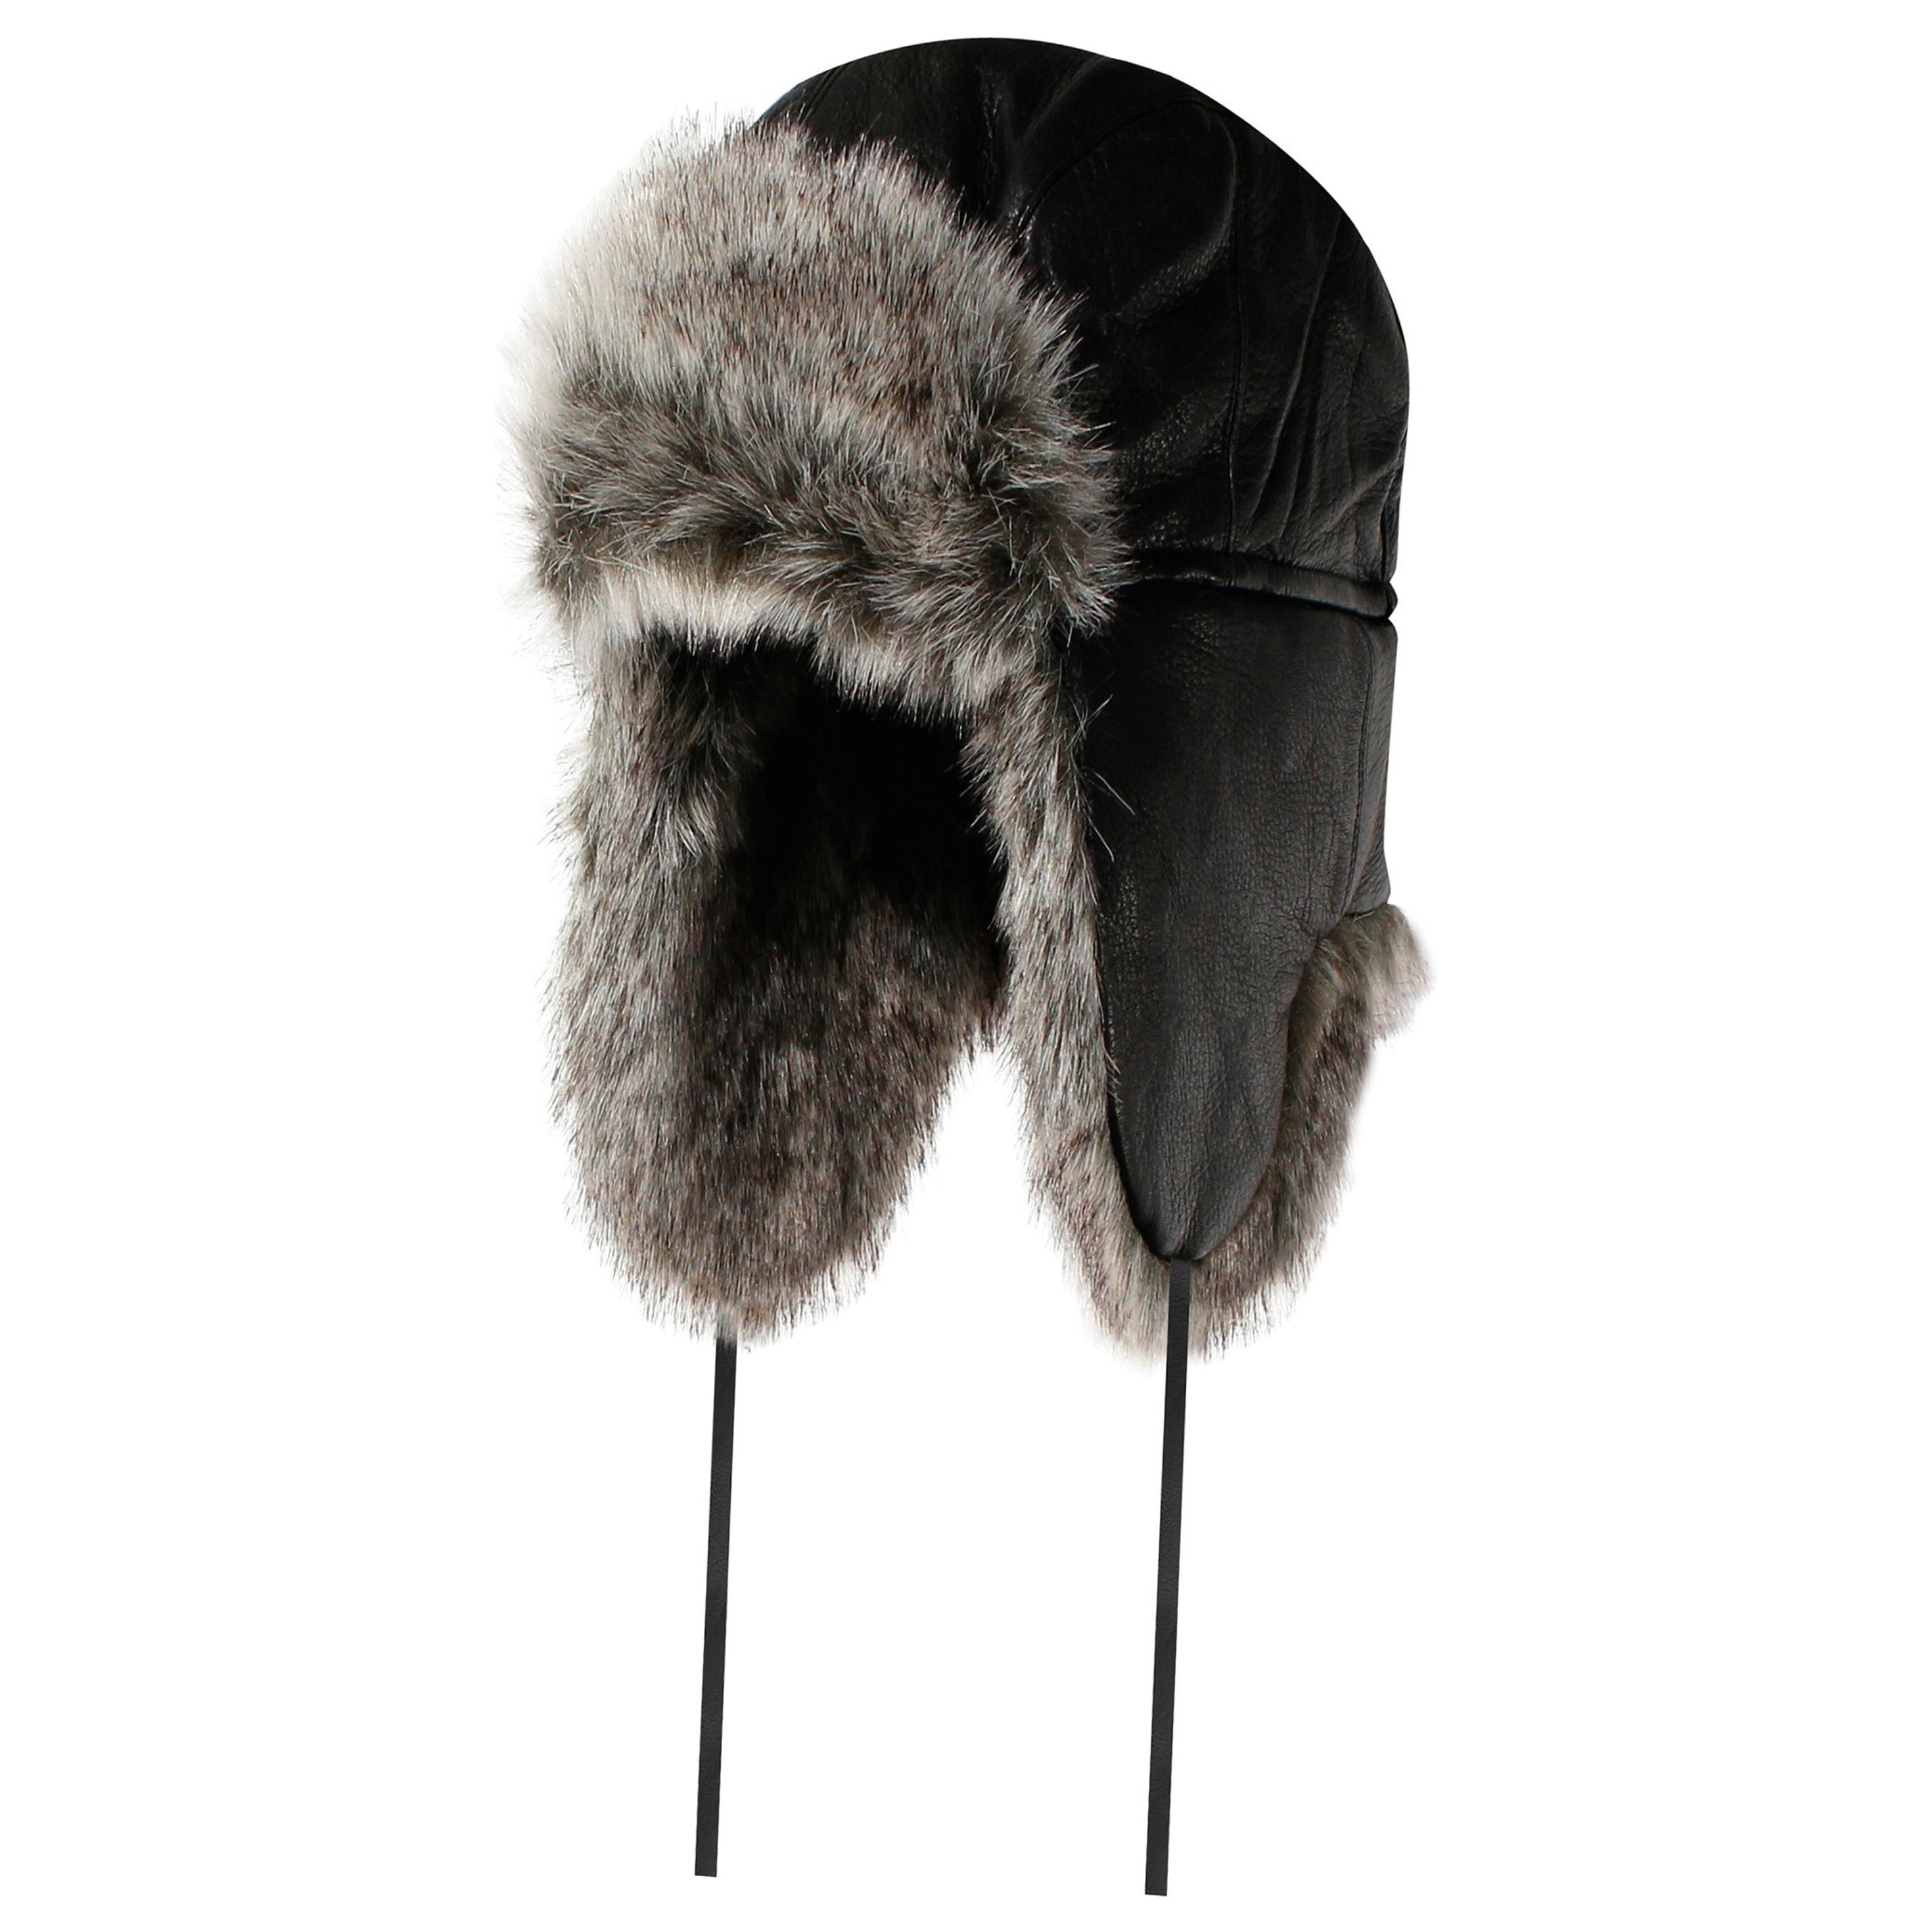 "Chambéry" aviator style hat leather and fur - Unisex